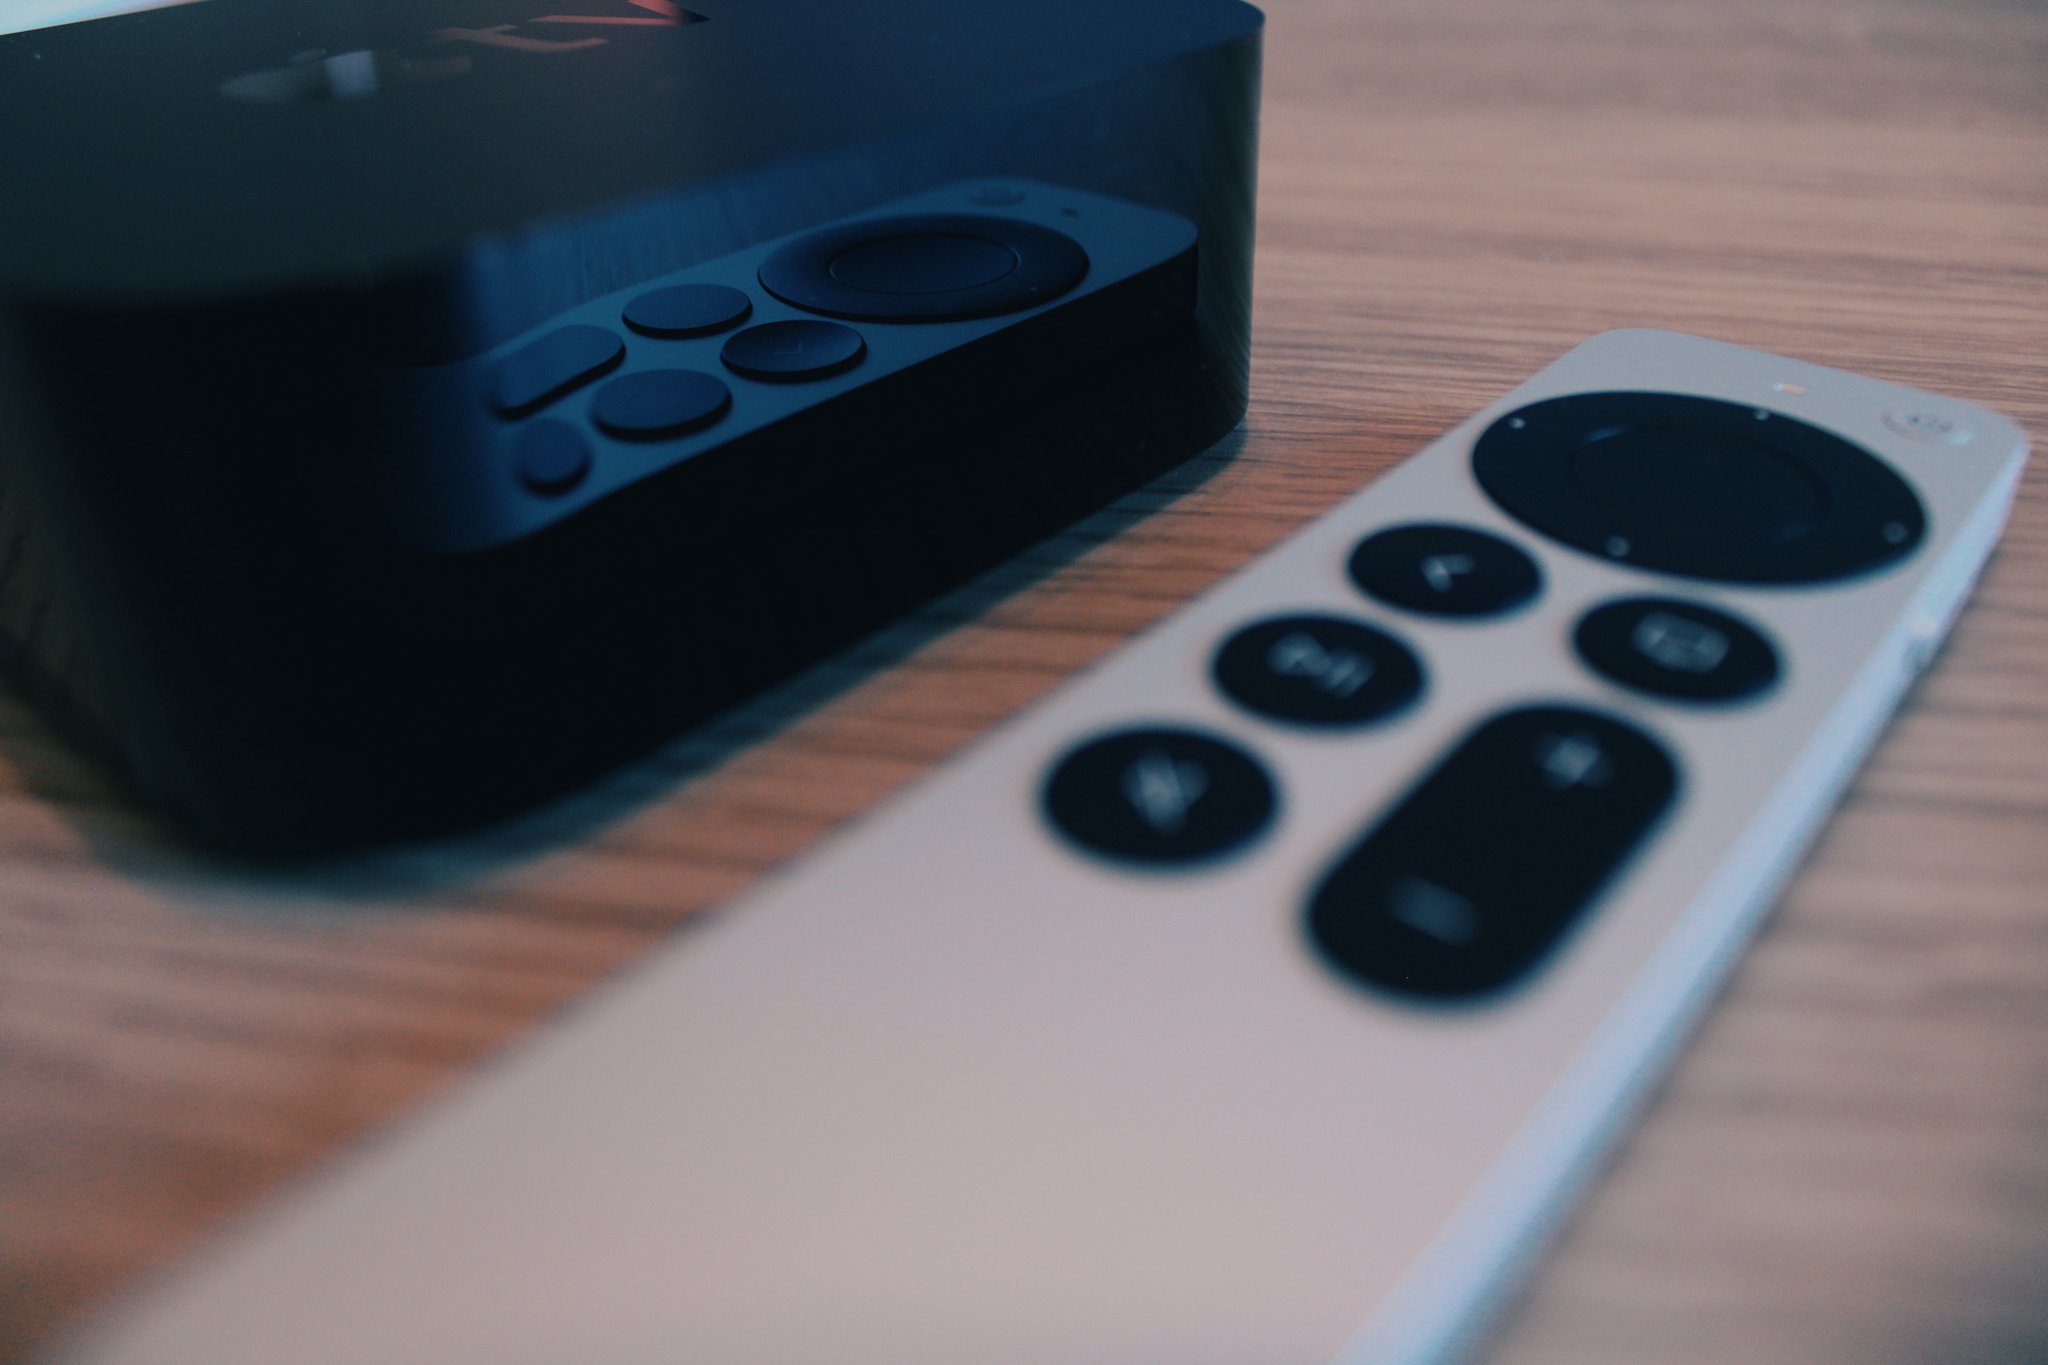 How to fast forward and rewind on Apple TV remote - 9to5Mac